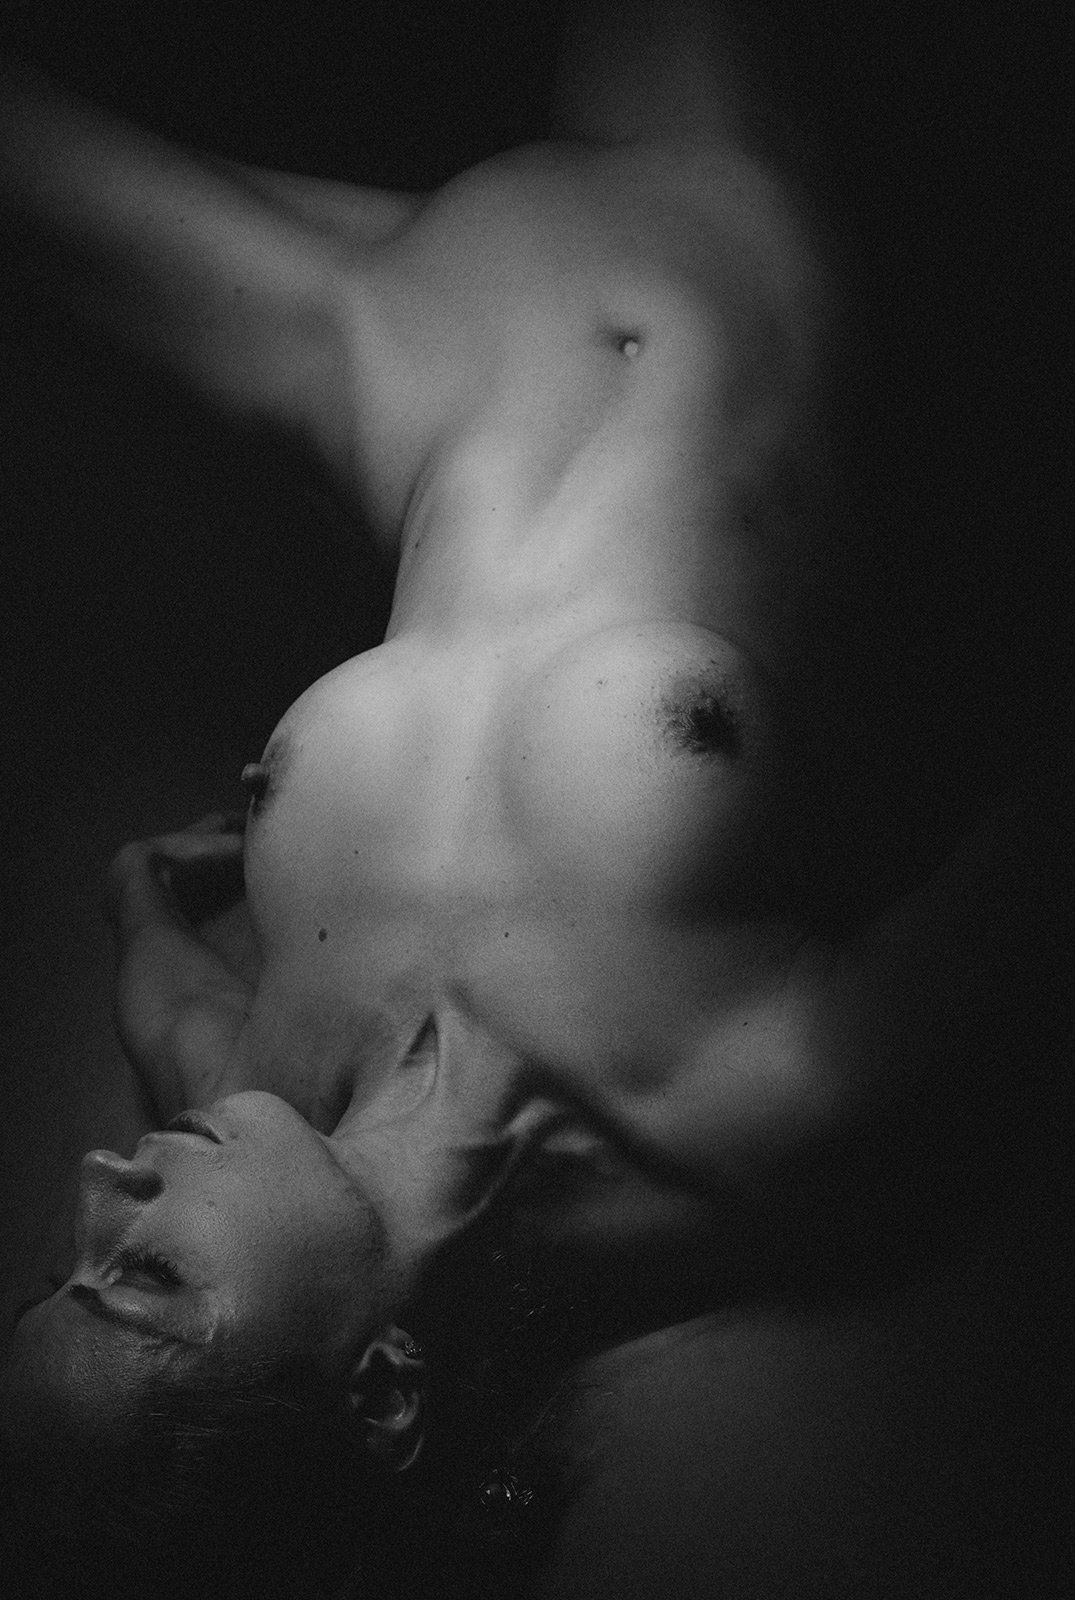 fine, art, nudes, nude, sex, sexy, nudes, naked, orgasm, sensual, sensuality, black and white, expression, expressed, mood, dark, beauty, love, tenderness, dramatic, Дмитрий Толоконов